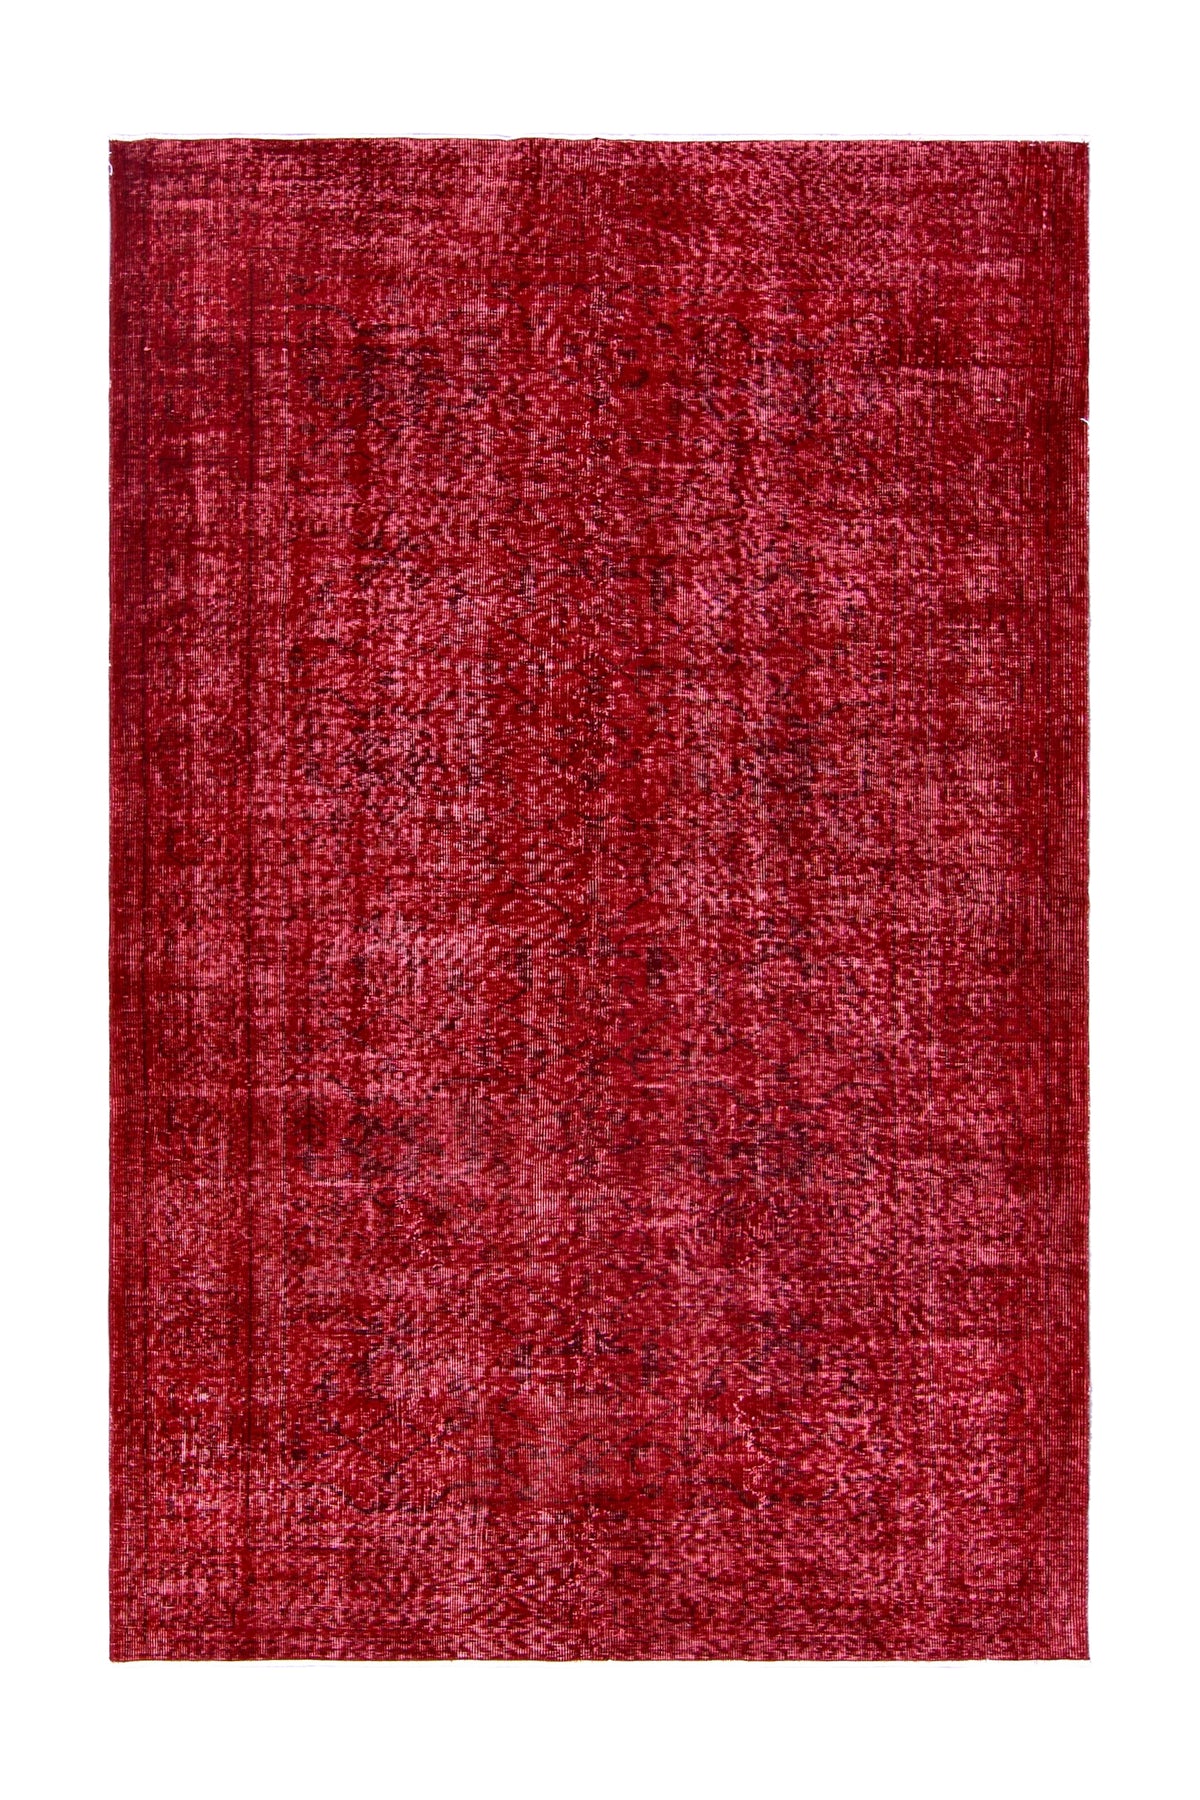 Abbellonna - Vintage Red Overdyed Rug